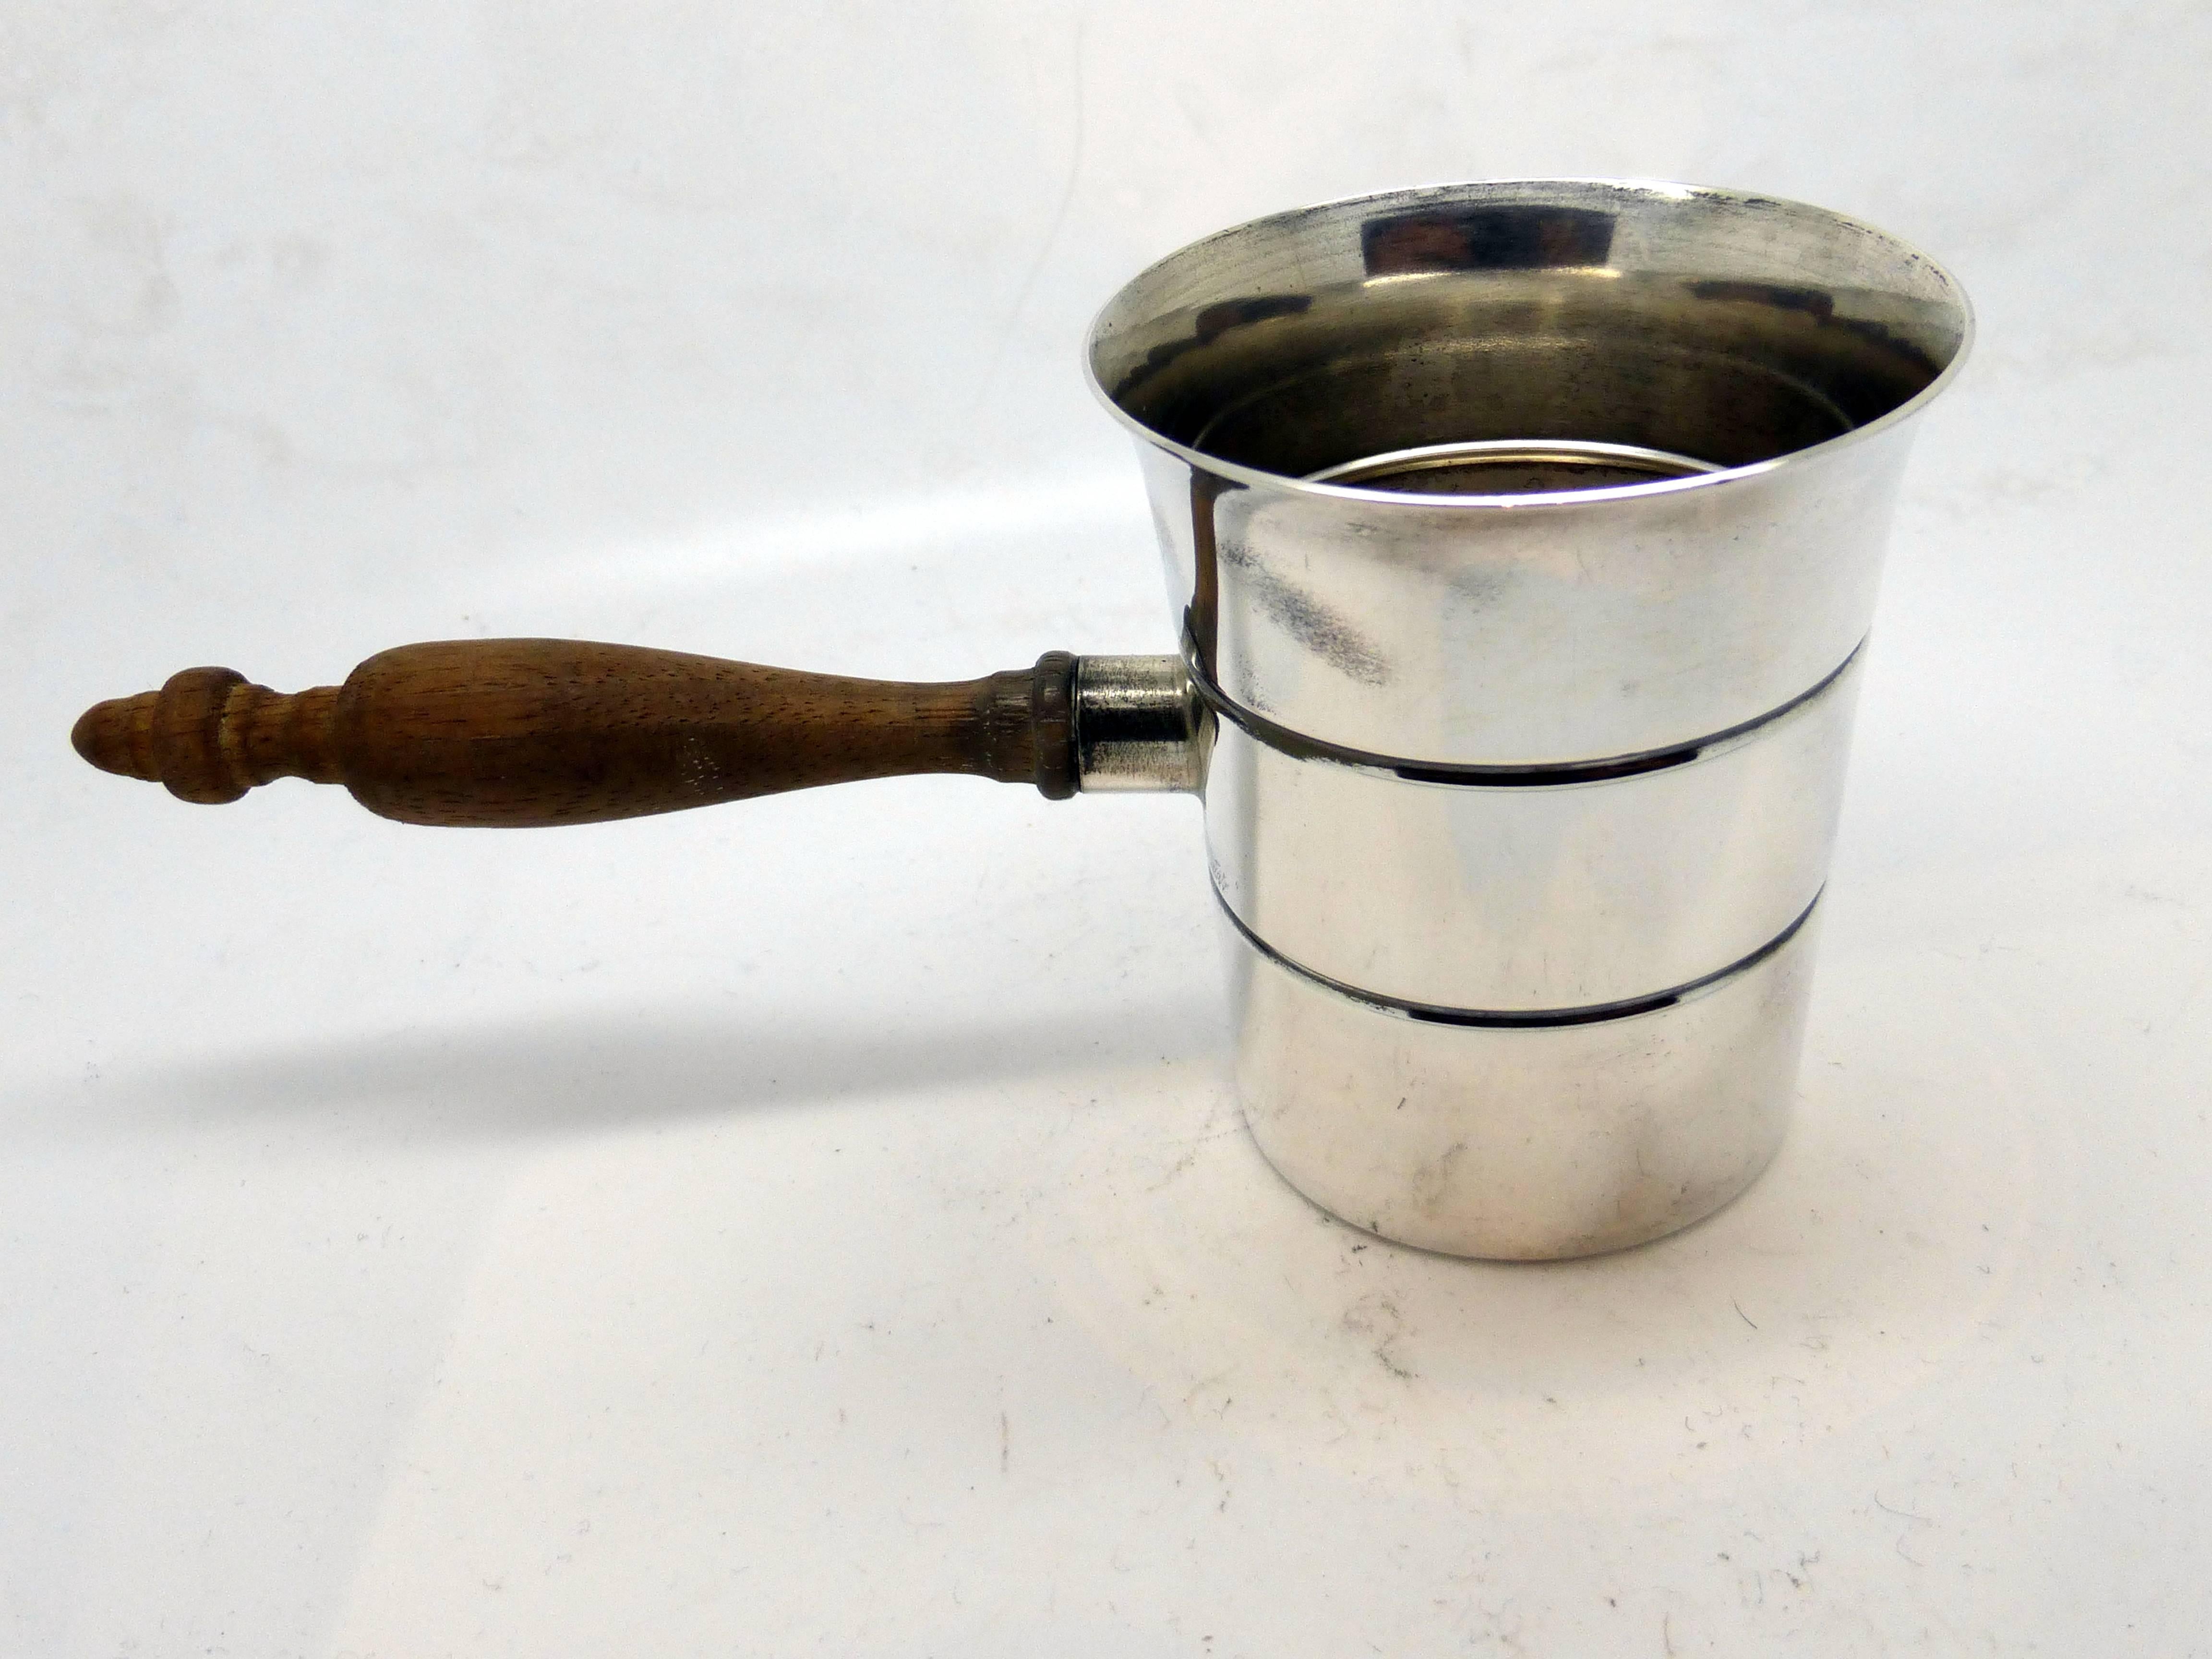 Unusual, Art Deco, sterling silver shot glass or jigger with wooden handle, International Silver Co., Wallingford, Ct., circa 1930s. Ounces of liquid held are clearly marked on sterling silver. Shot glass or jigger will hold more than two ounces. @2